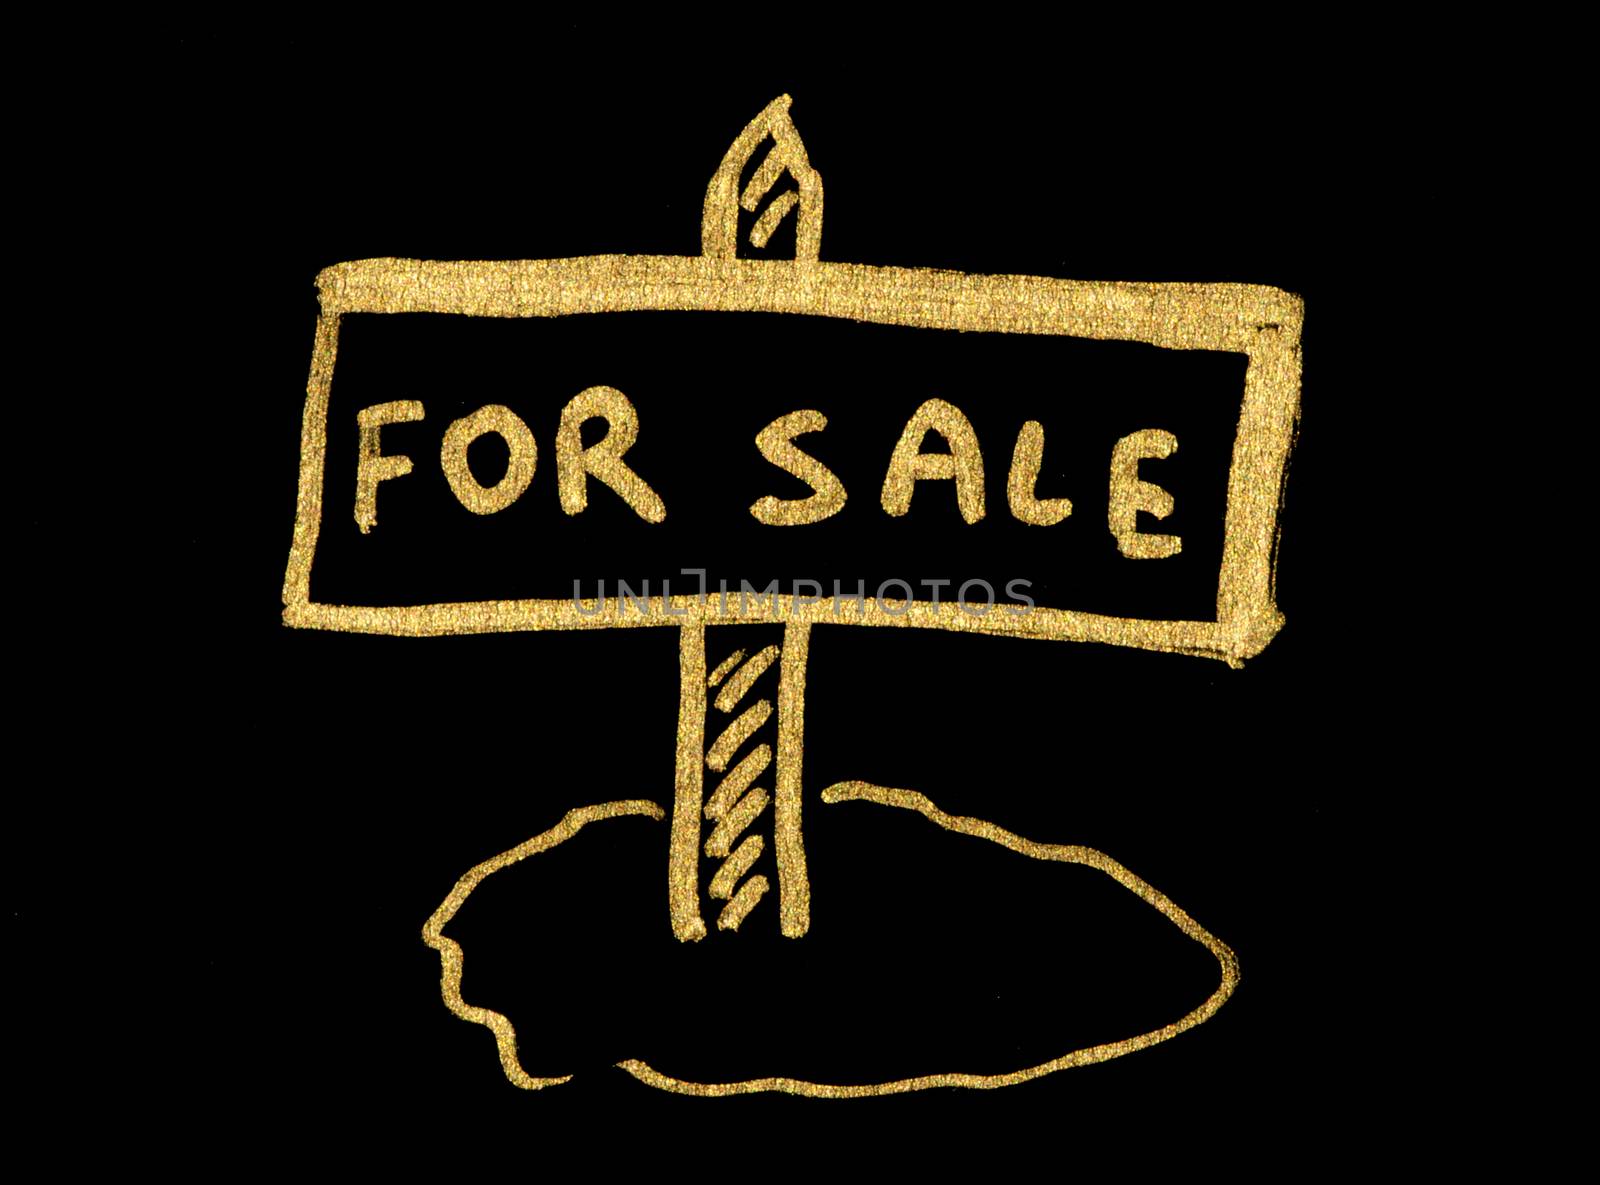 For sale gold color text  by deyan_georgiev